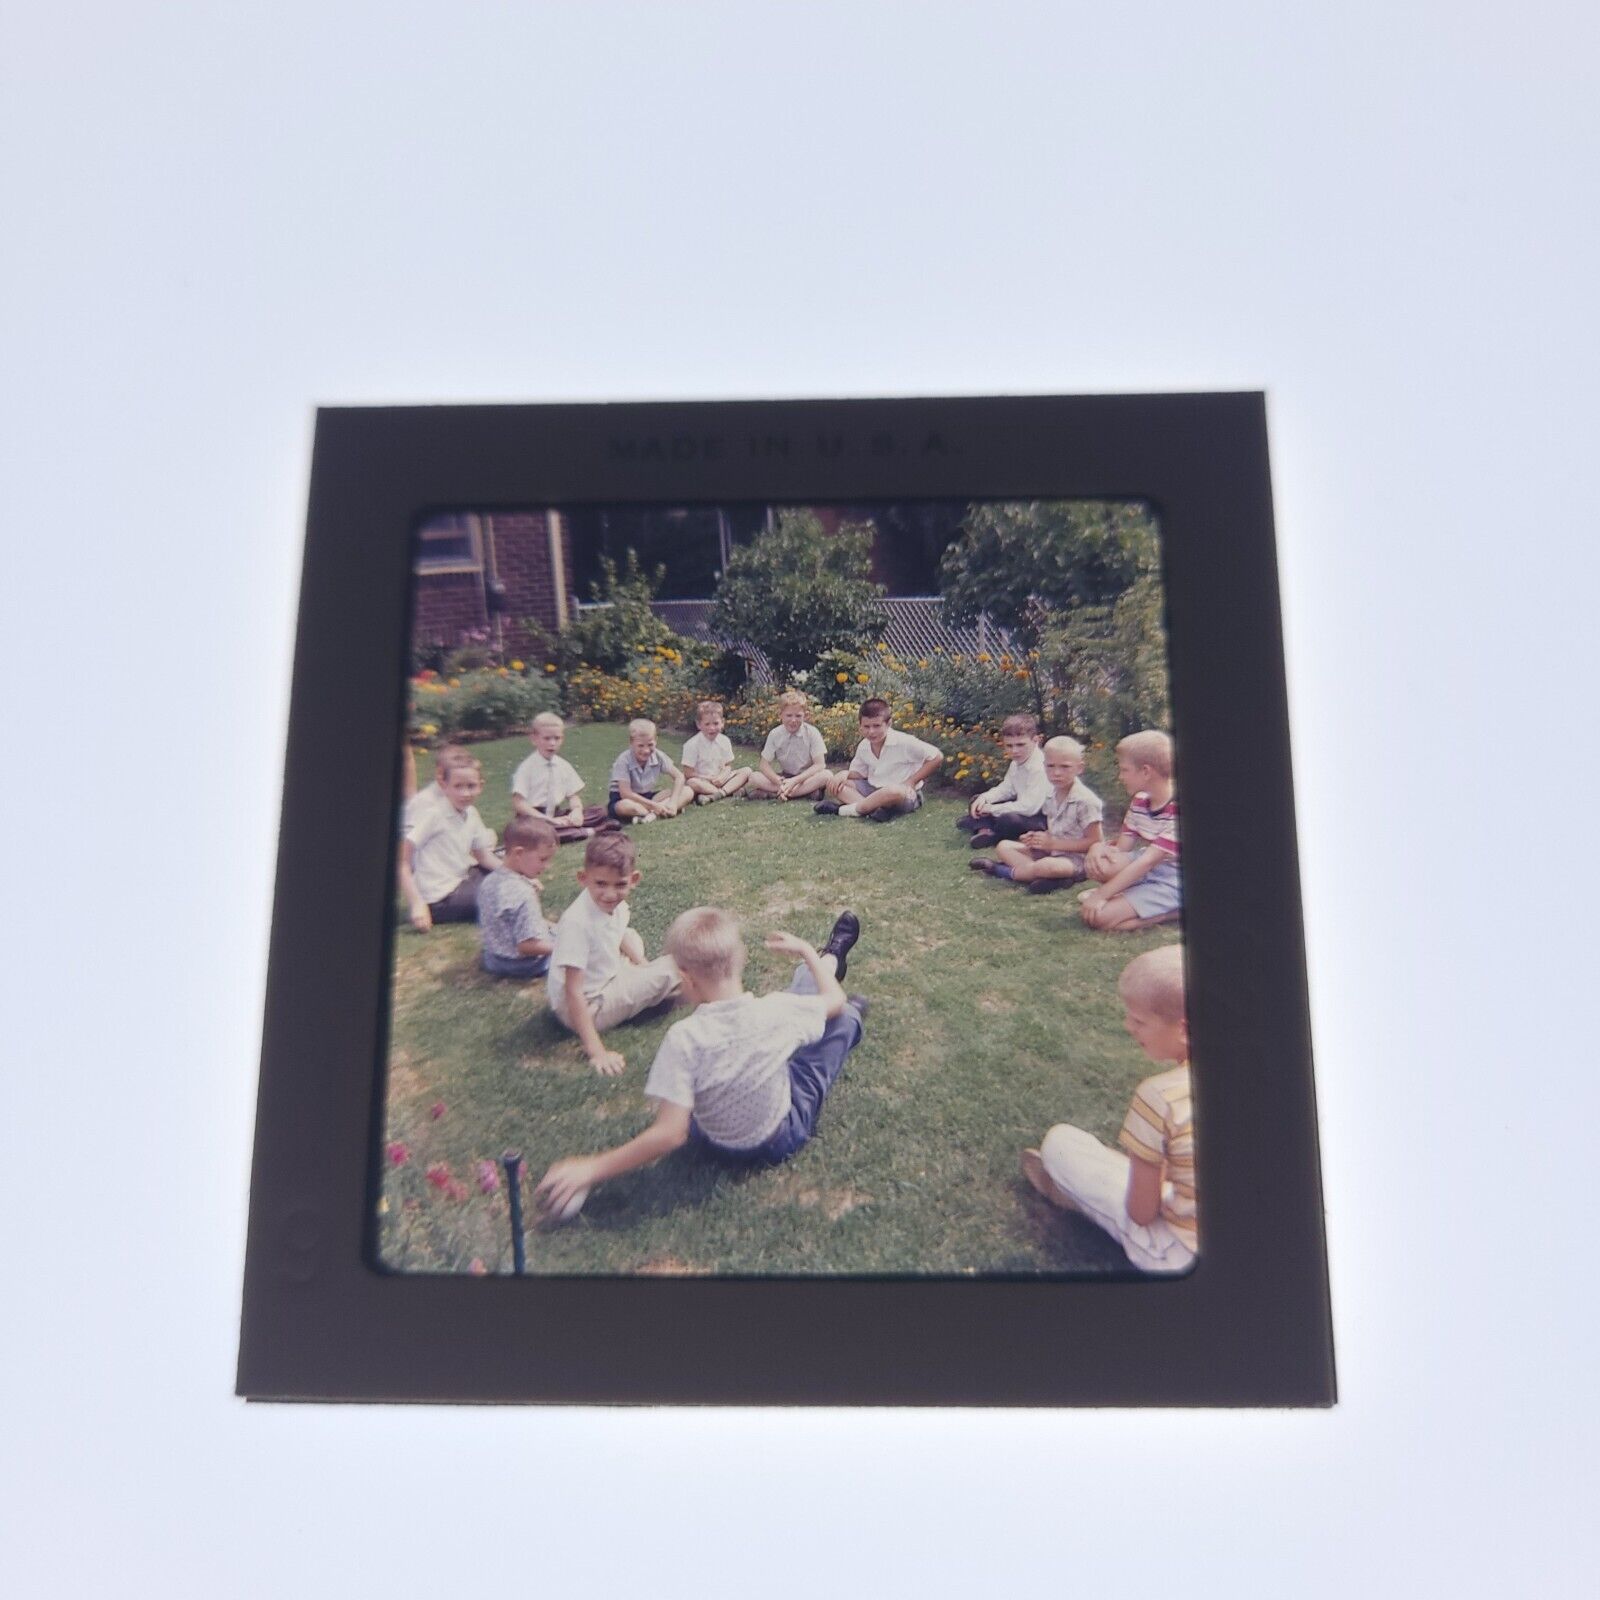 1962 Boy Birthday Party Kids Playing Games Outside Super 127 Slide